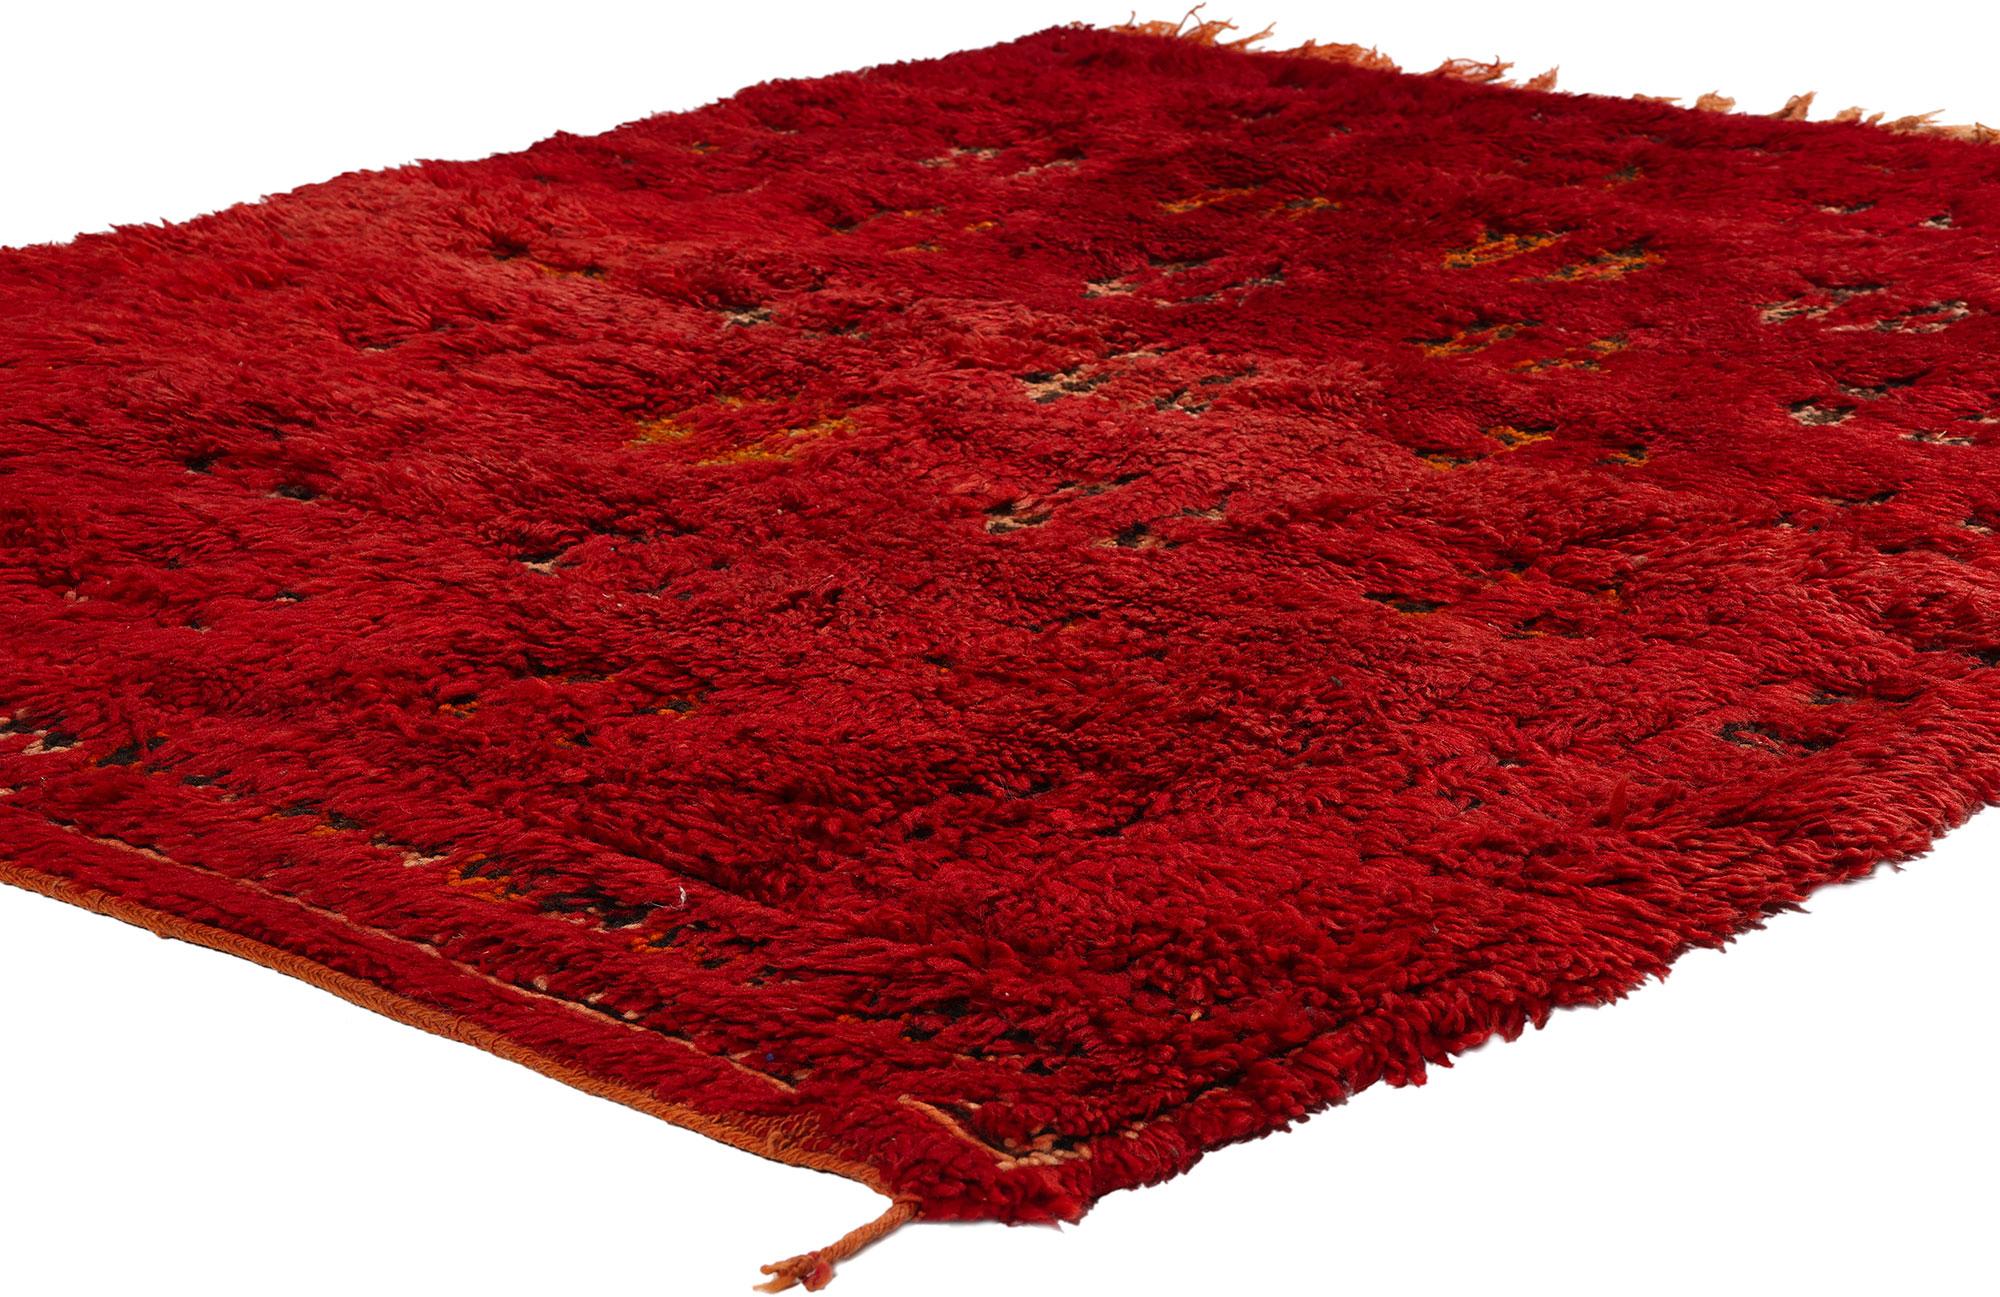 21796 Vintage Red Beni MGuild Moroccan Rug, 04'07 x 05'06. Beni M'Guild rugs represent a cherished tradition hailing from the Beni M'Guild tribe nestled in the heart of Morocco's Middle Atlas Mountains. These exquisite creations are meticulously